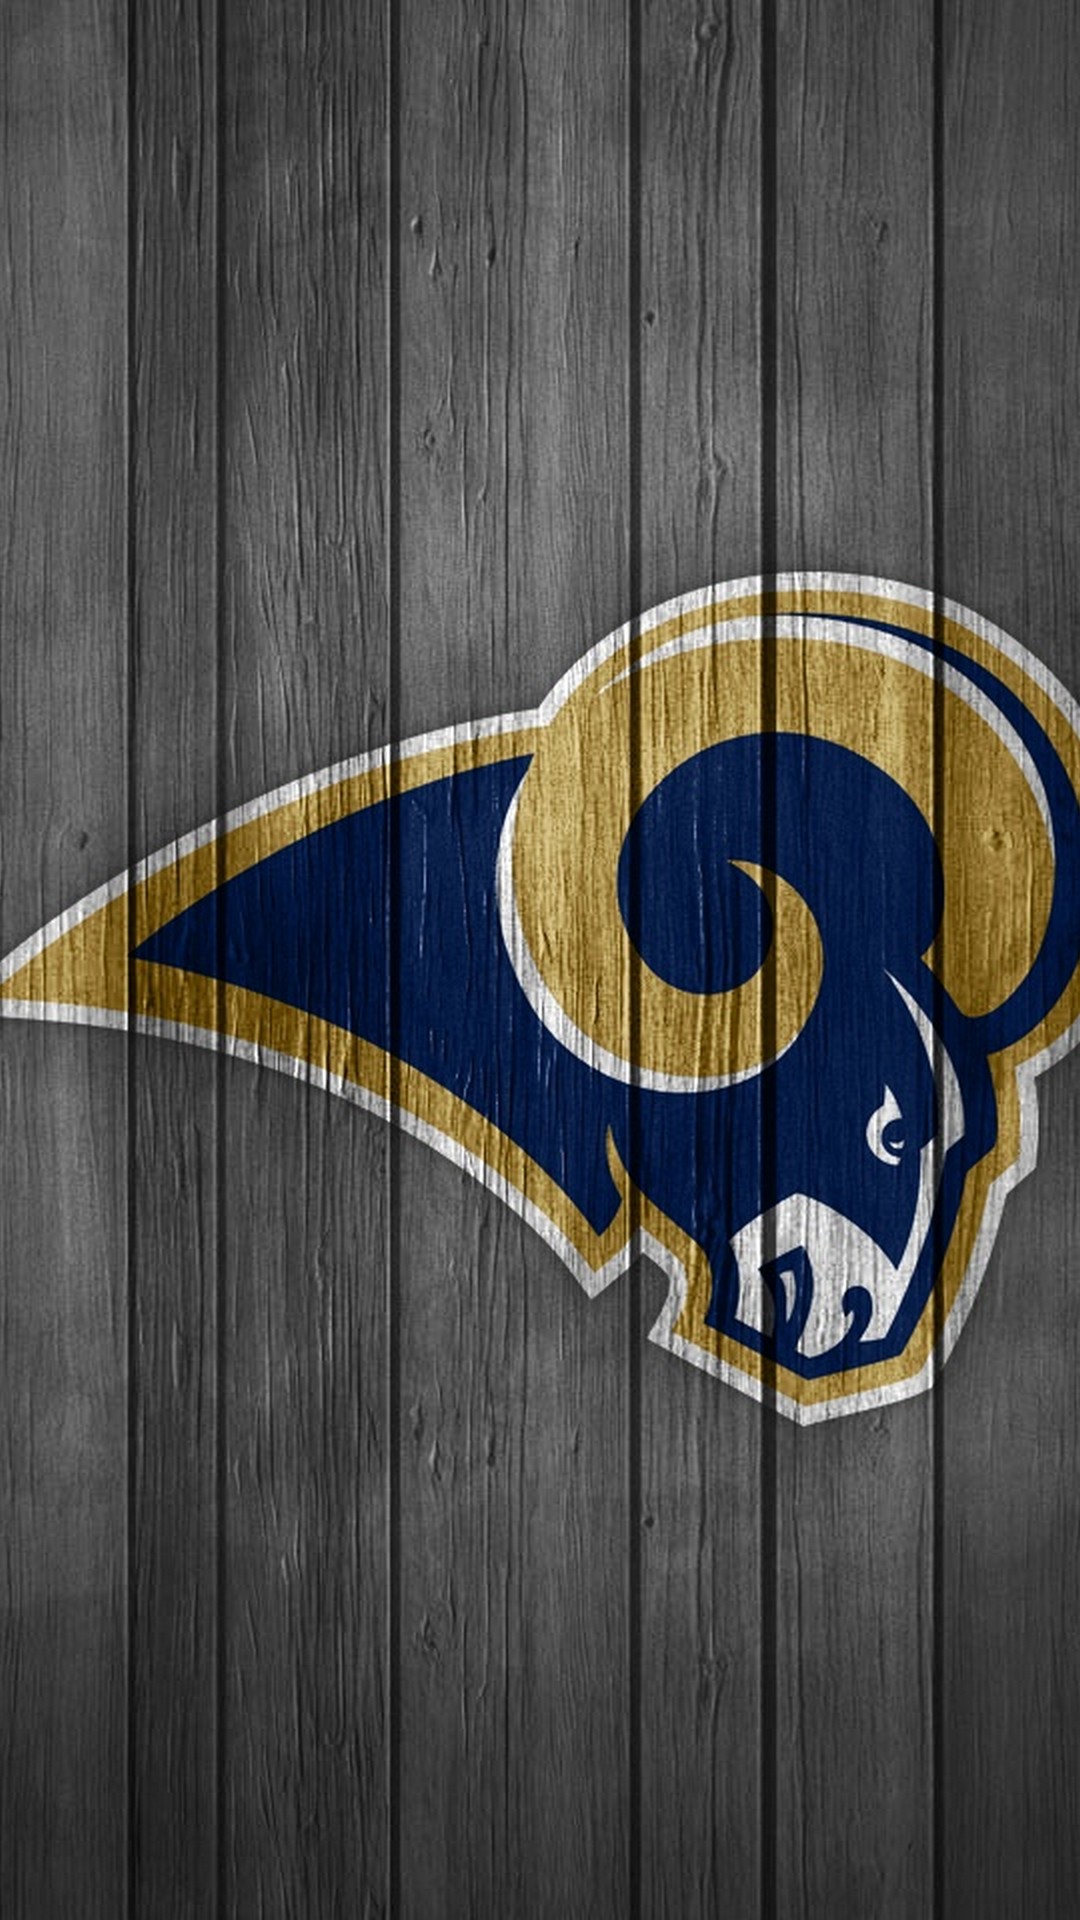 Los Angeles Rams iPhone Wallpaper Lock Screen with high-resolution 1080x1920 pixel. Download and set as wallpaper for Desktop Computer, Apple iPhone X, XS Max, XR, 8, 7, 6, SE, iPad, Android